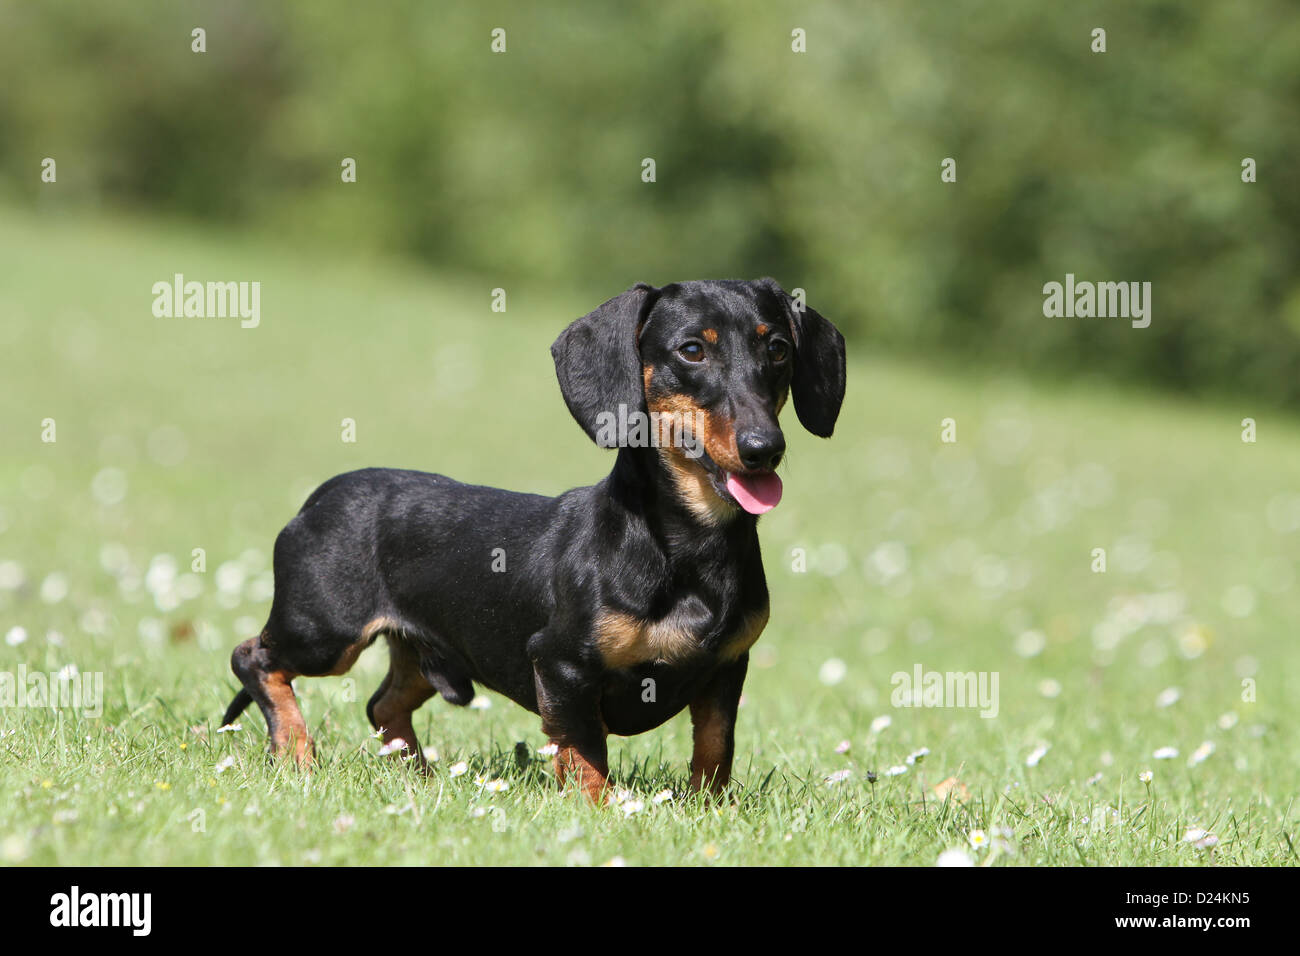 Dog Dachshund /  Dackel / Teckel  shorthaired adult (black and tan) standing in a meadow Stock Photo